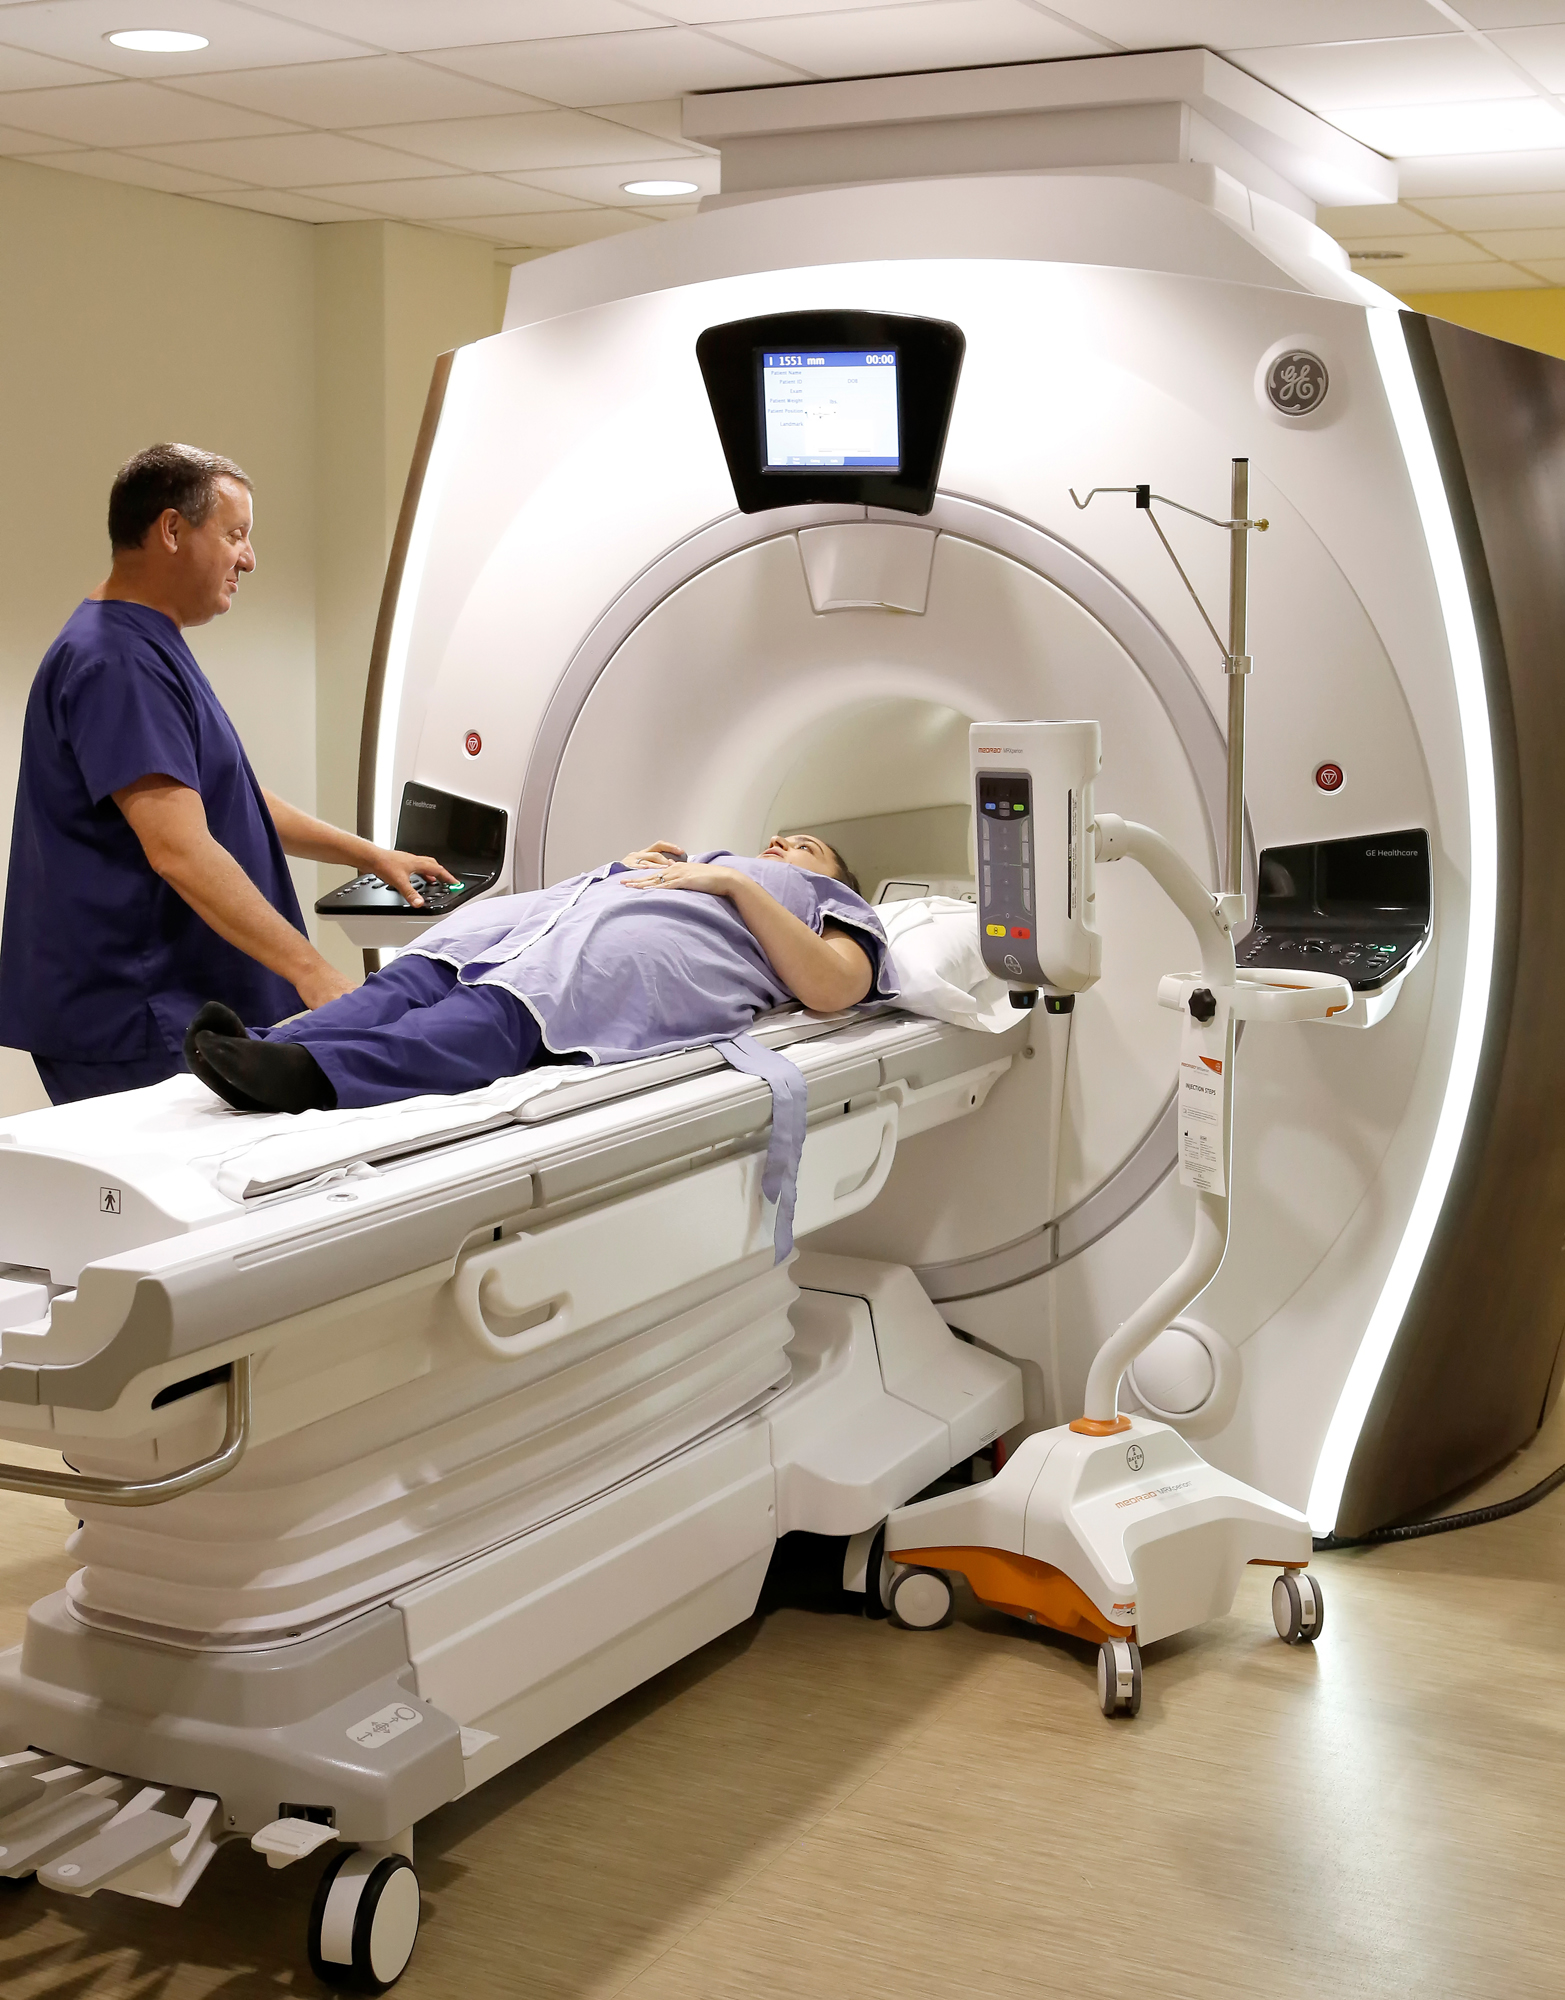 Radiologist performing MRI on patient